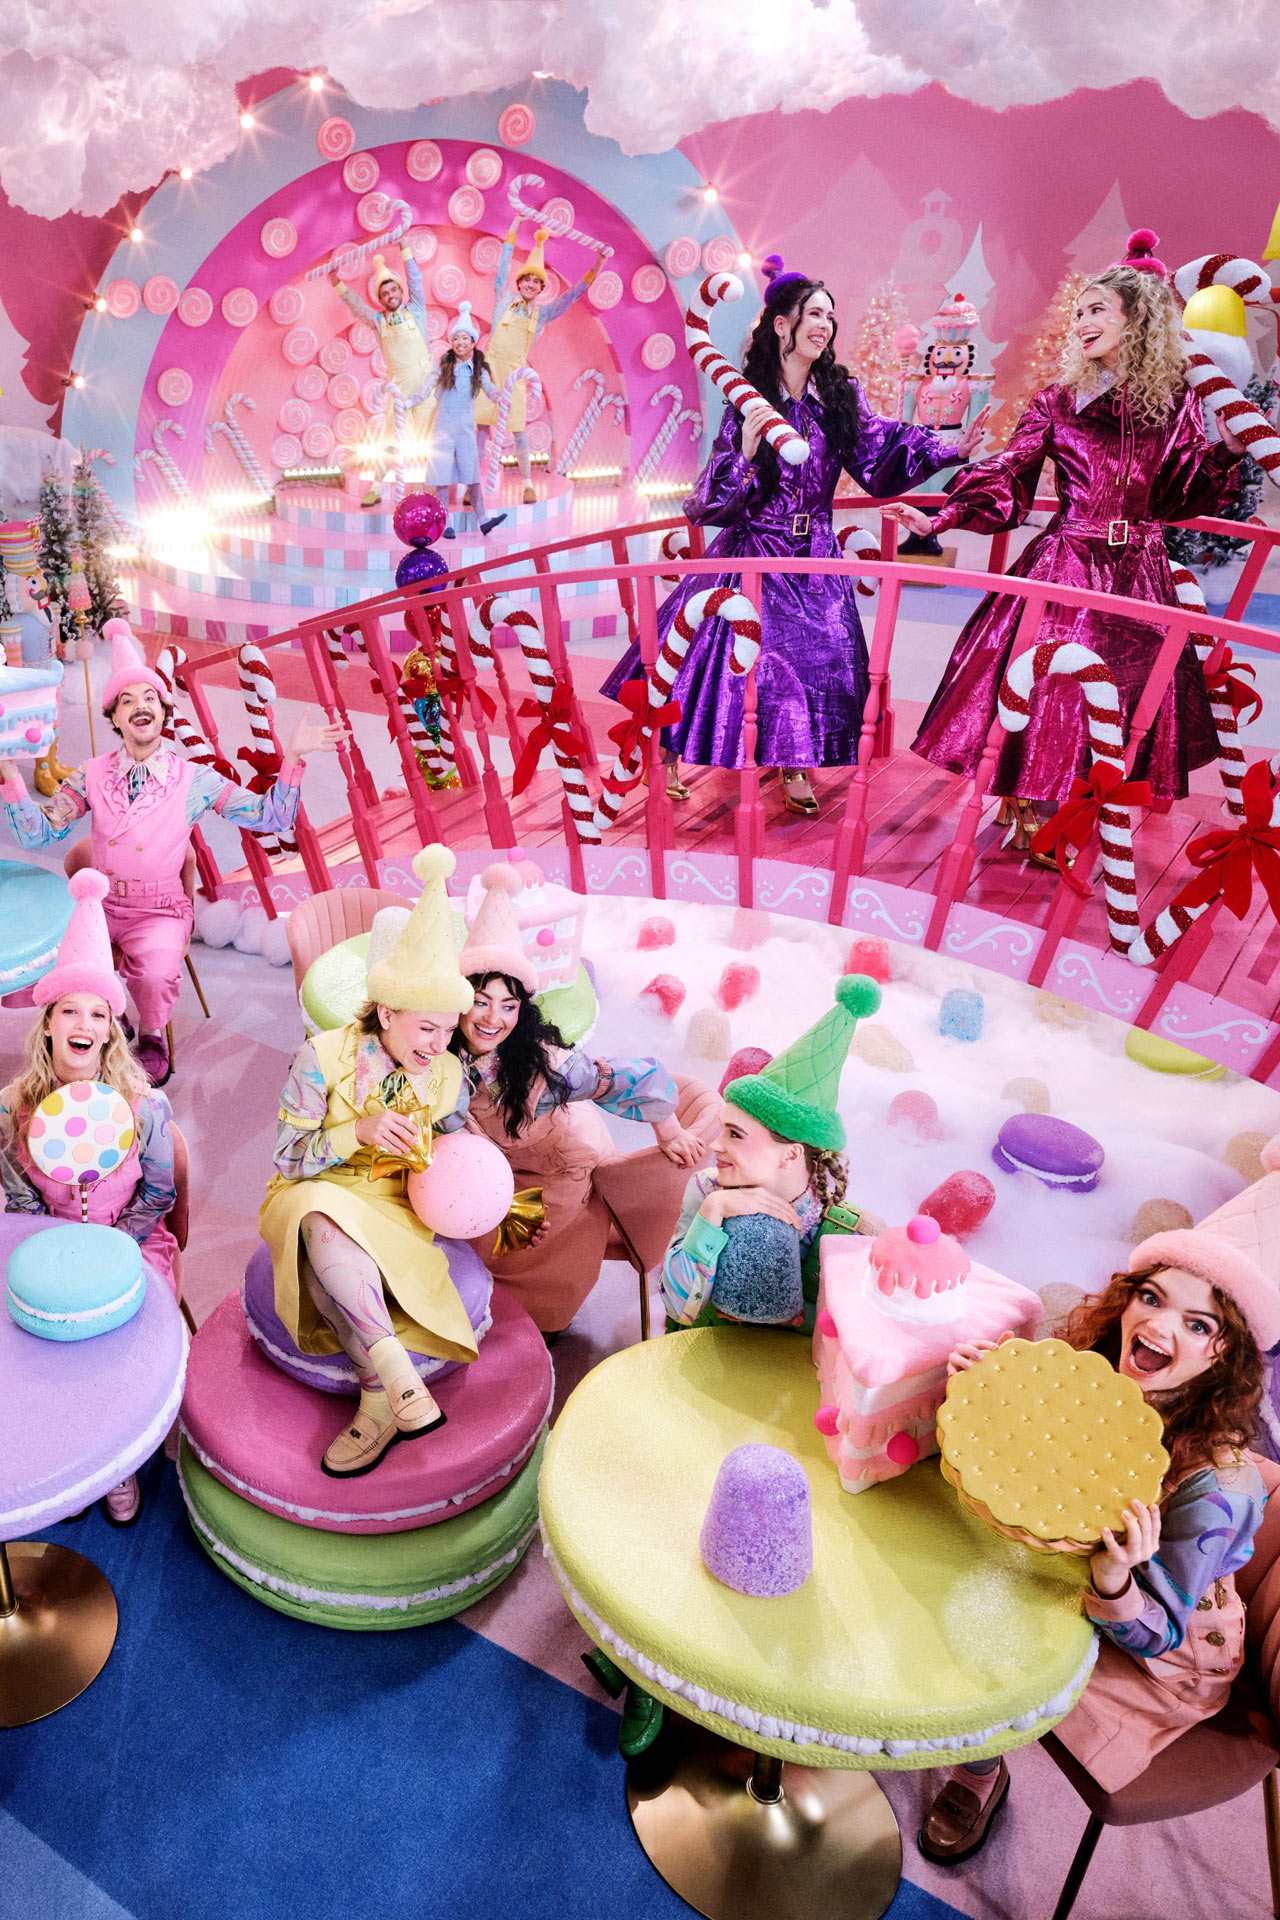 playful image of people in costume in a candy land like setting